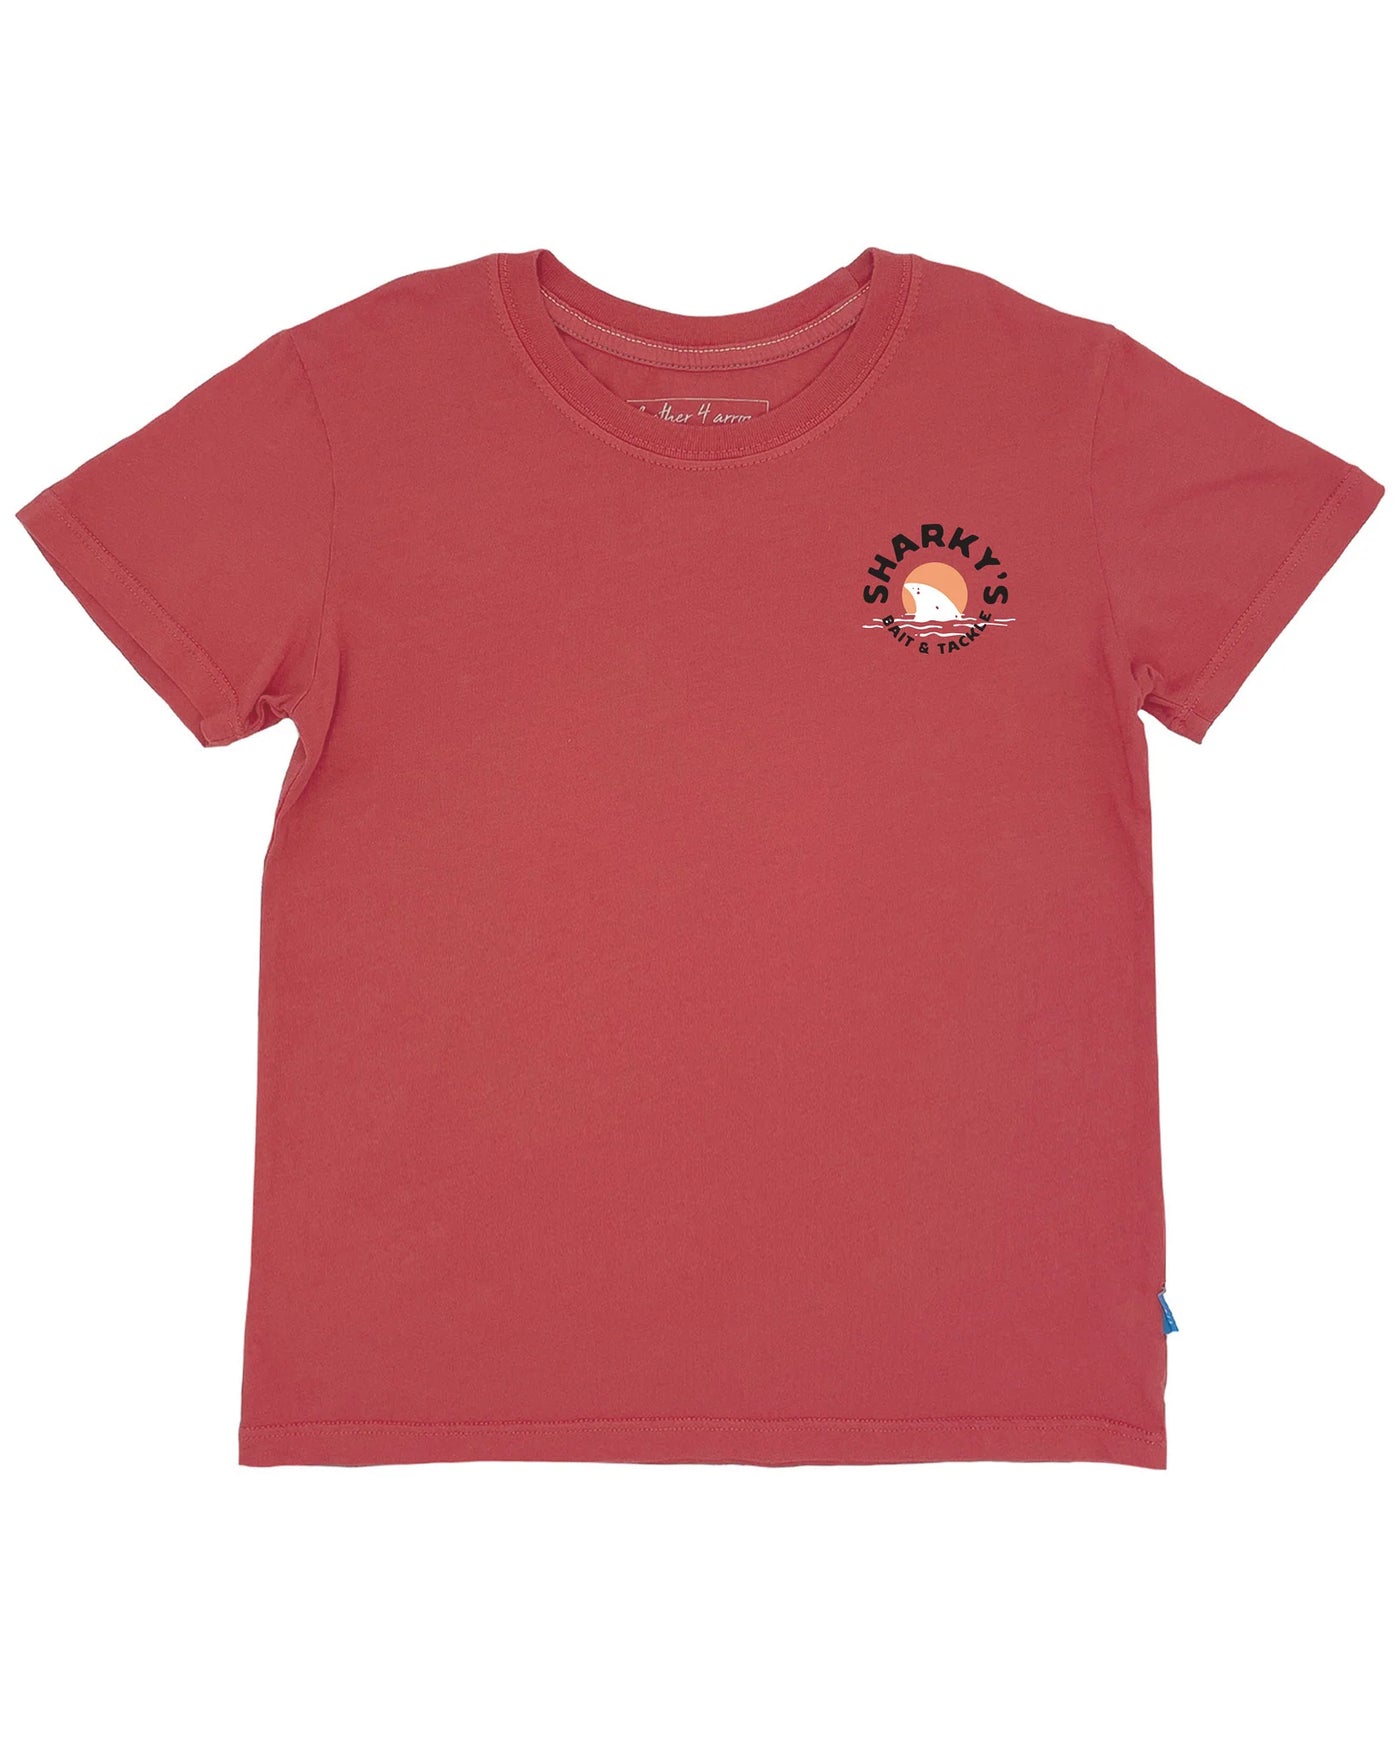 Sharky's Vintage Tee-Chili Pepper